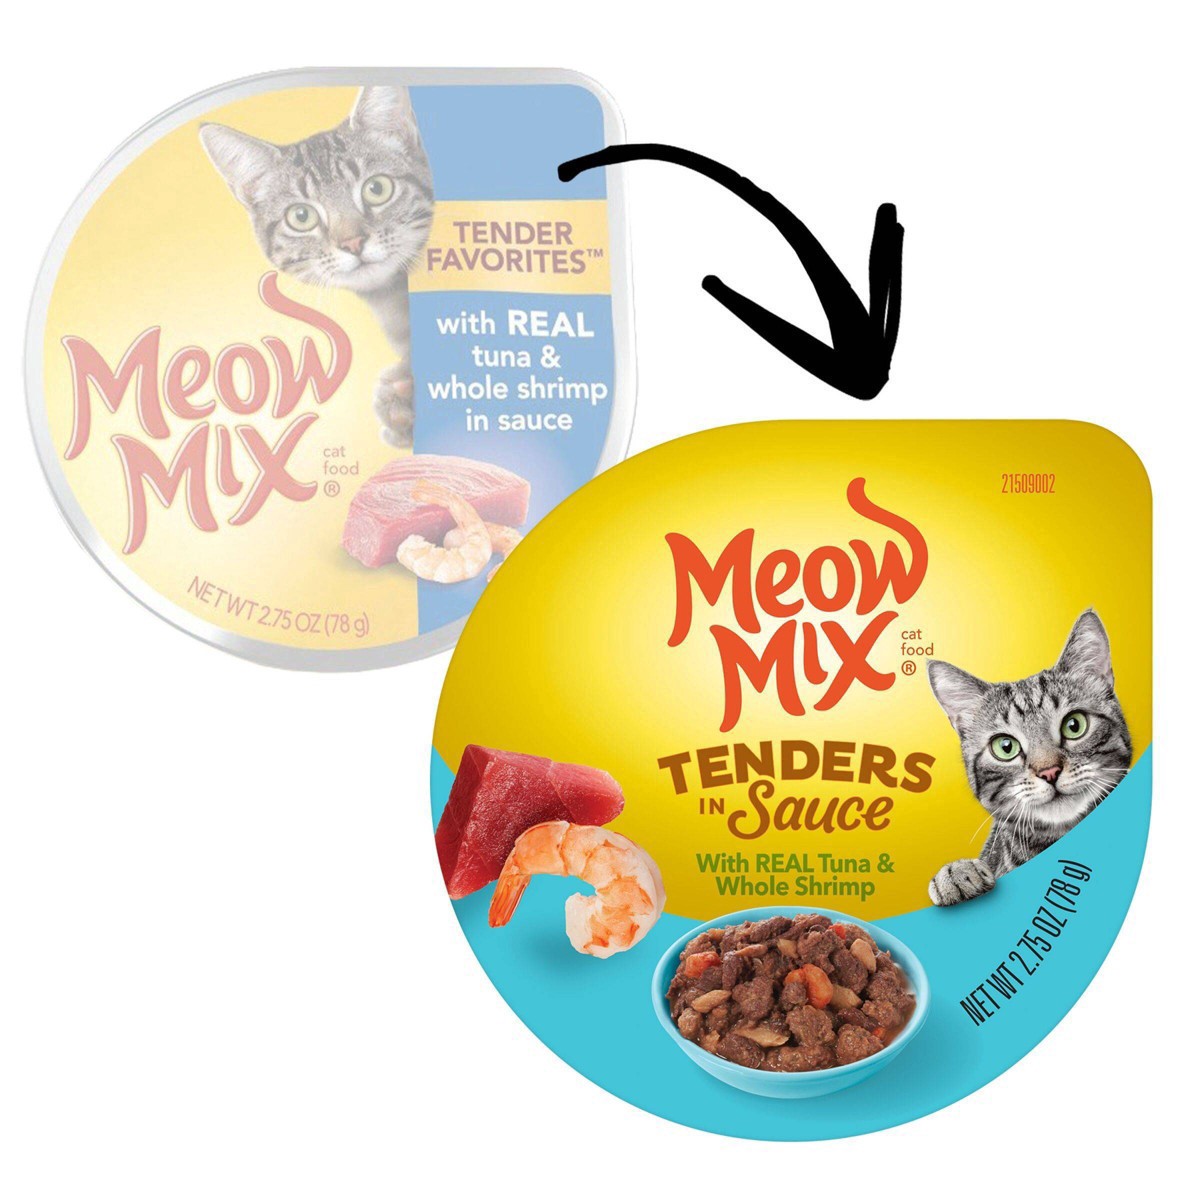 slide 17 of 59, Meow Mix Tenders in Sauce Wet Cat Food With REAL Tuna & Whole Shrimp, 2.75 Oz. Cup (Packaging And Formulation Updates Underway), 2.7 oz